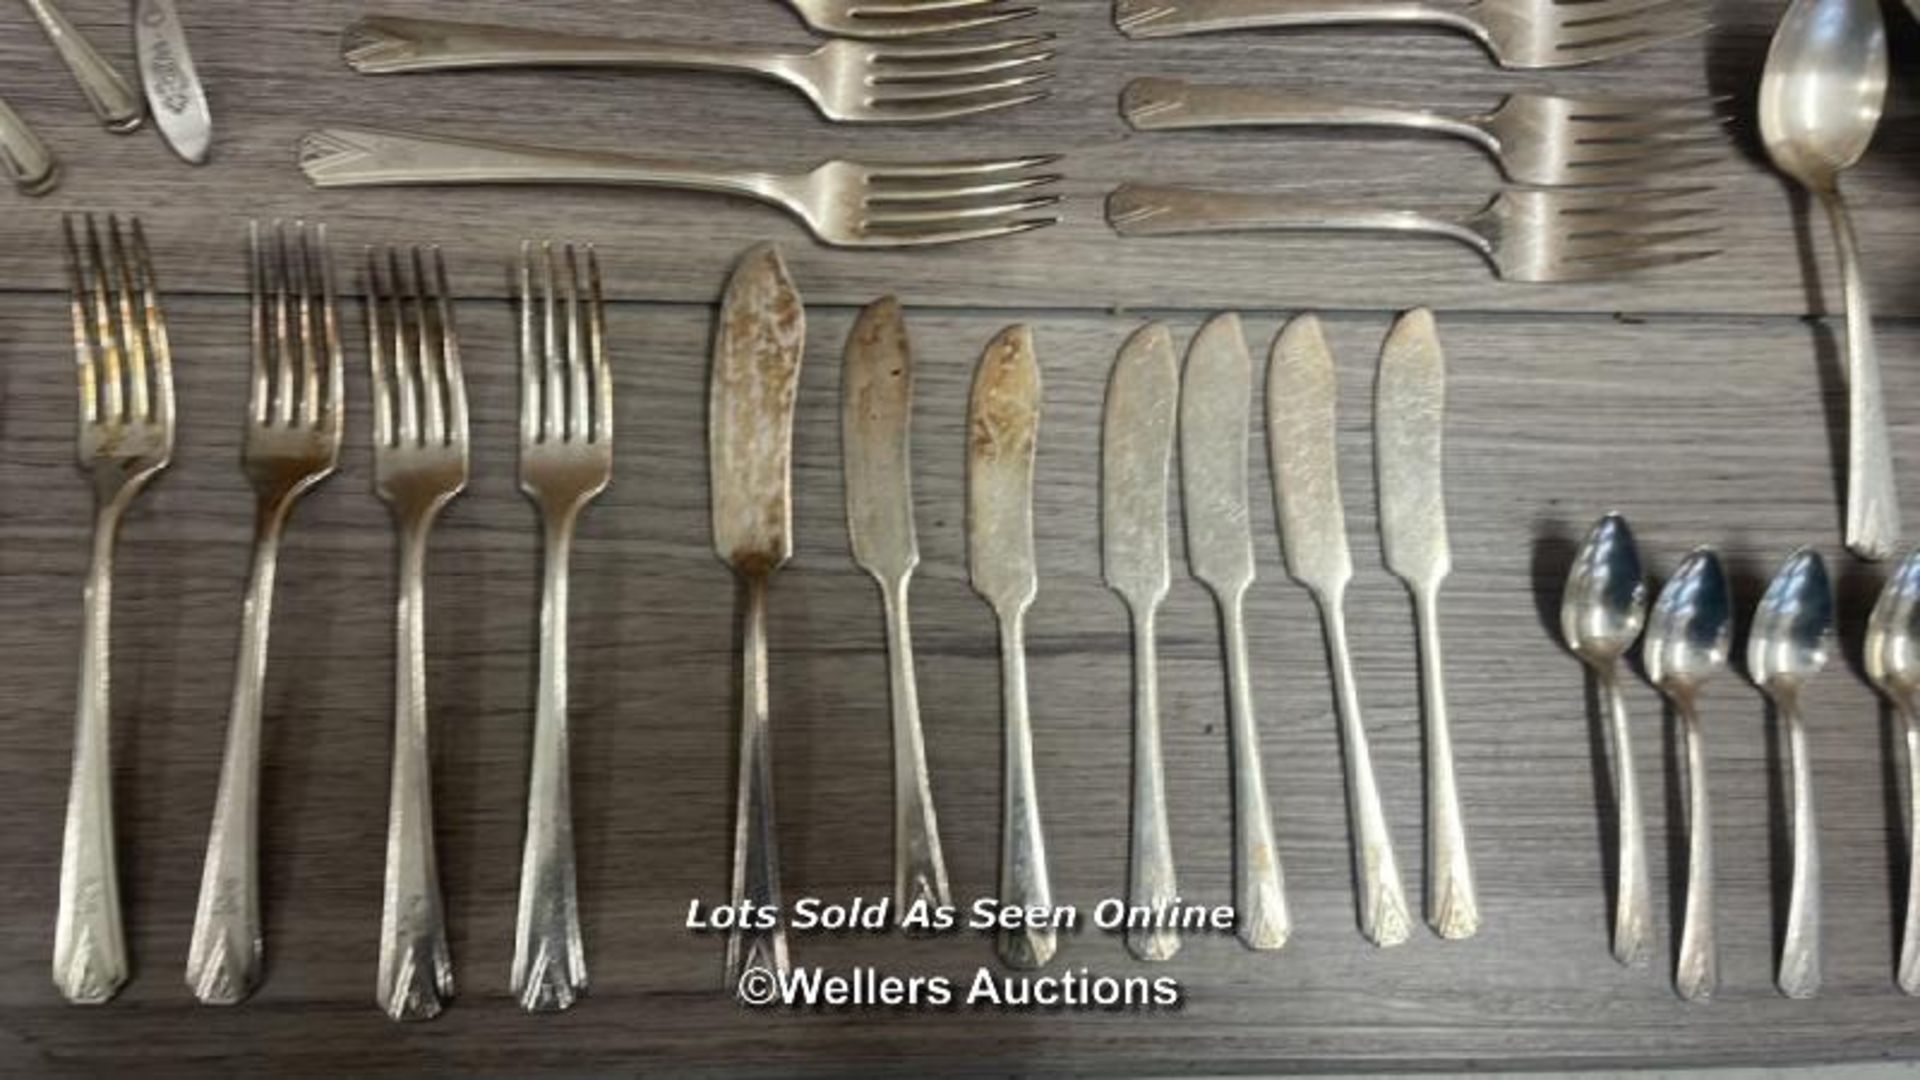 A LARGE COLLECTION OF COMMUNITY PLATE CUTLERY, COFFEE POT, MILK JUG, SUGAR BOWL AND SUGAR NIPS - Image 9 of 16